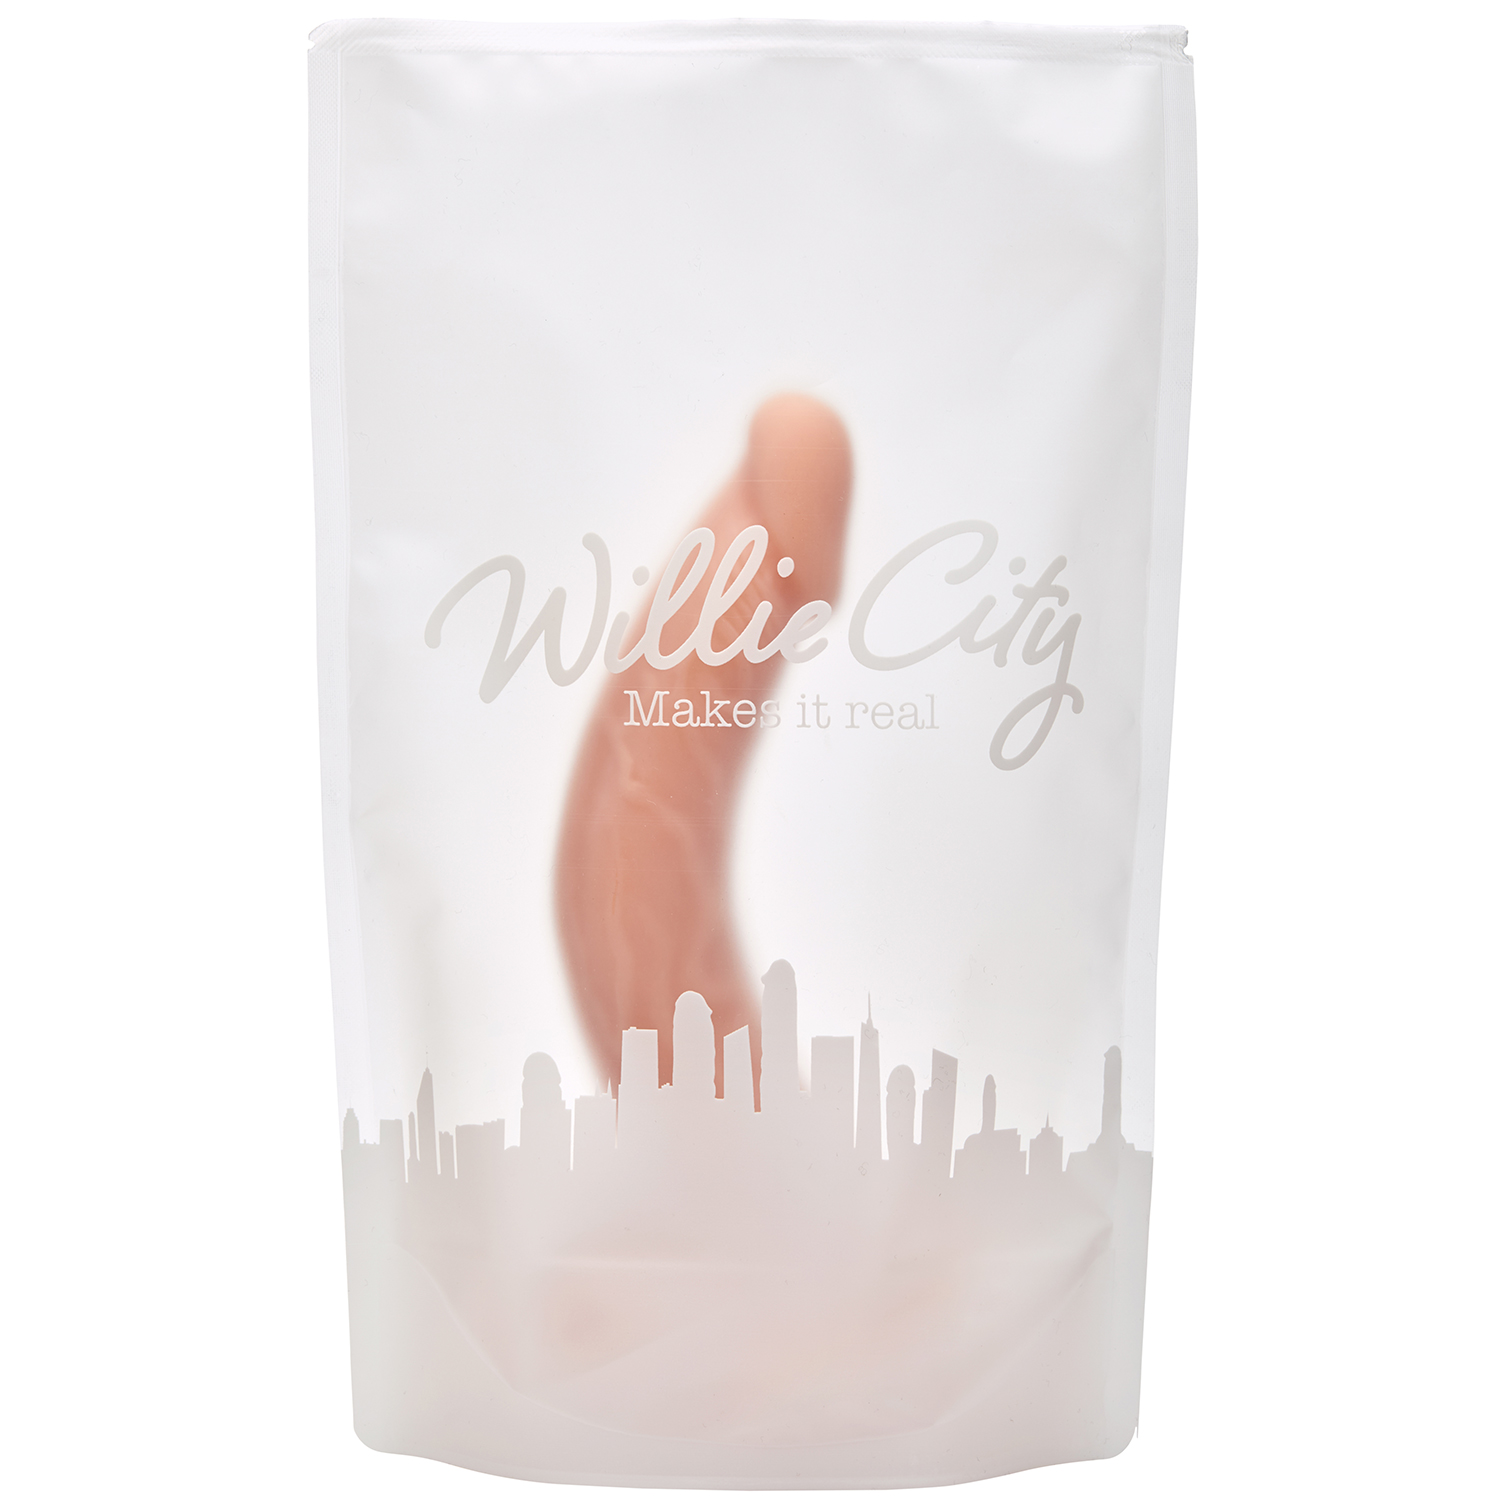 Willie City Classic Lover Realistisk Curved Dildo 20 cm thumbnail